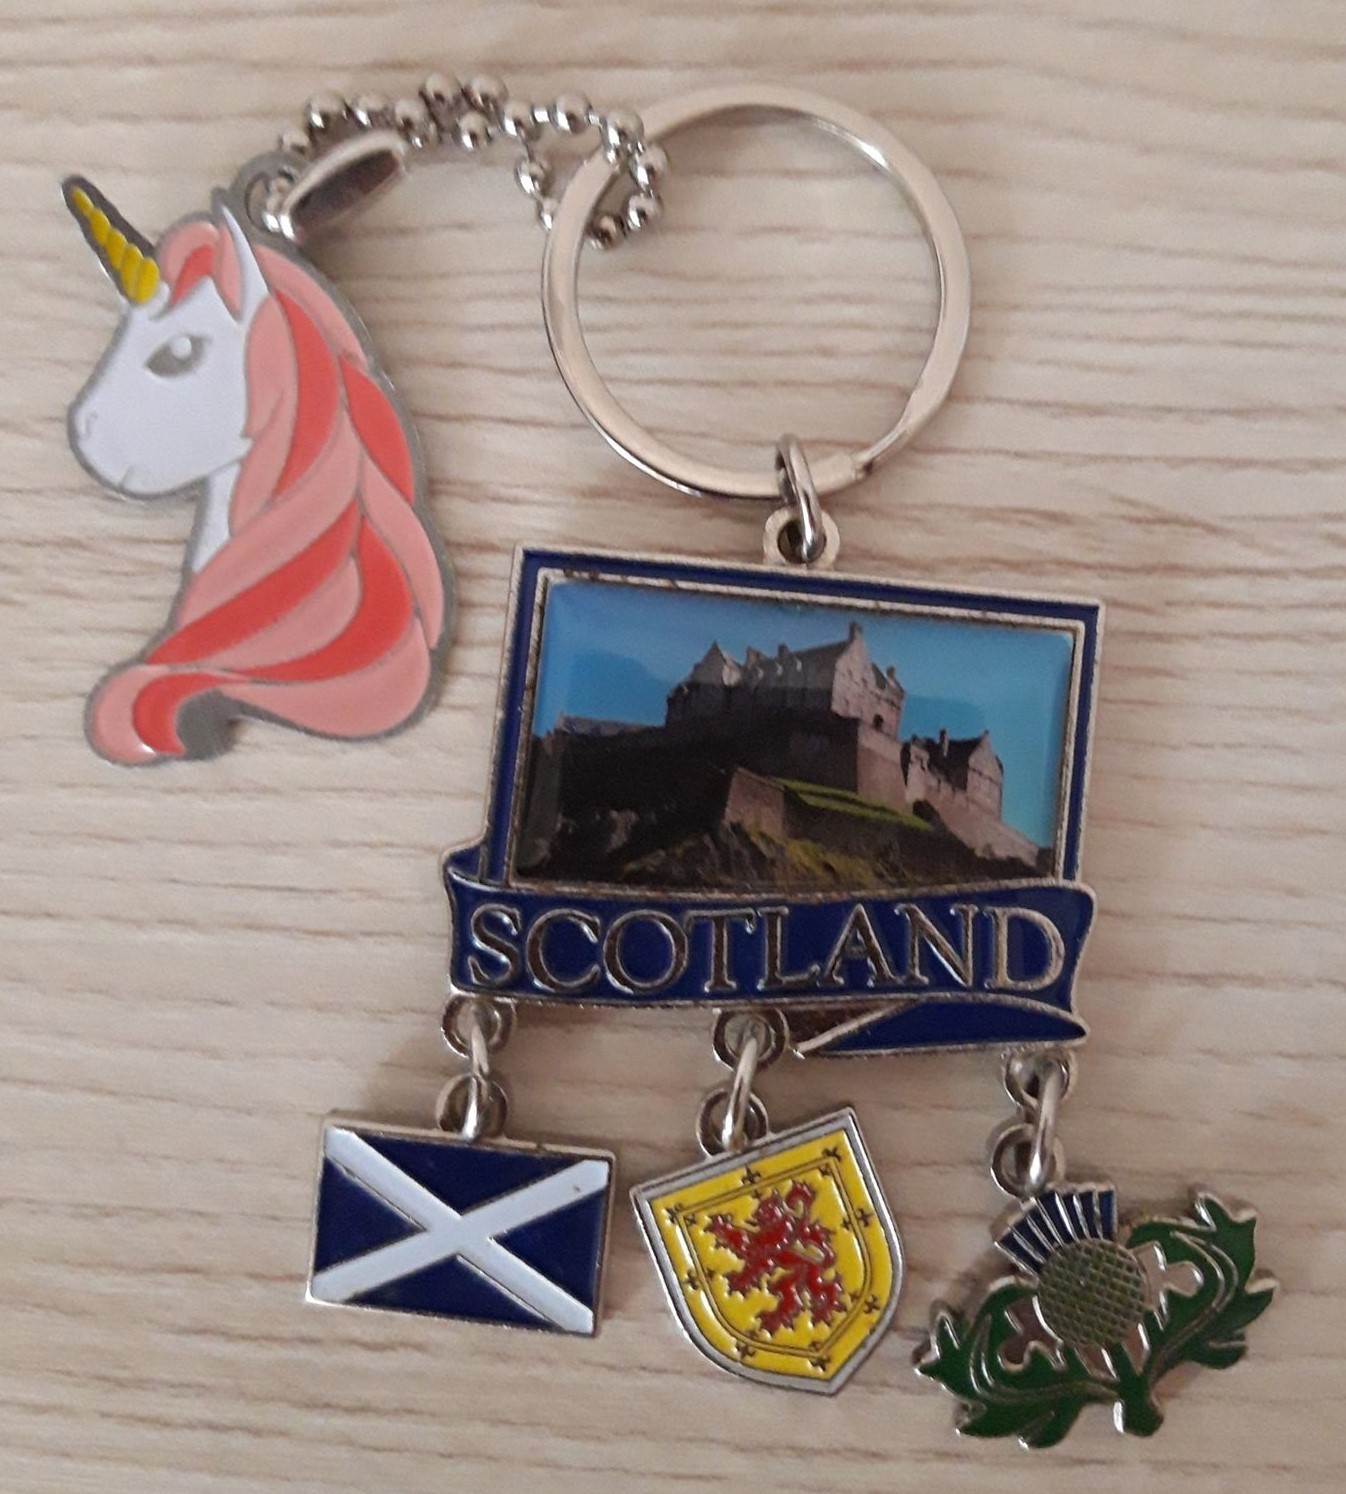 A metal unicorn head key ring with long floating hair (light pink and dark pink). She is carrying a metal Scotland key ring of Edinburgh Castle with the words Scotland across it, which is holding three metal trinkets: the Scotland flag, lion rampant and a Scottish thistle